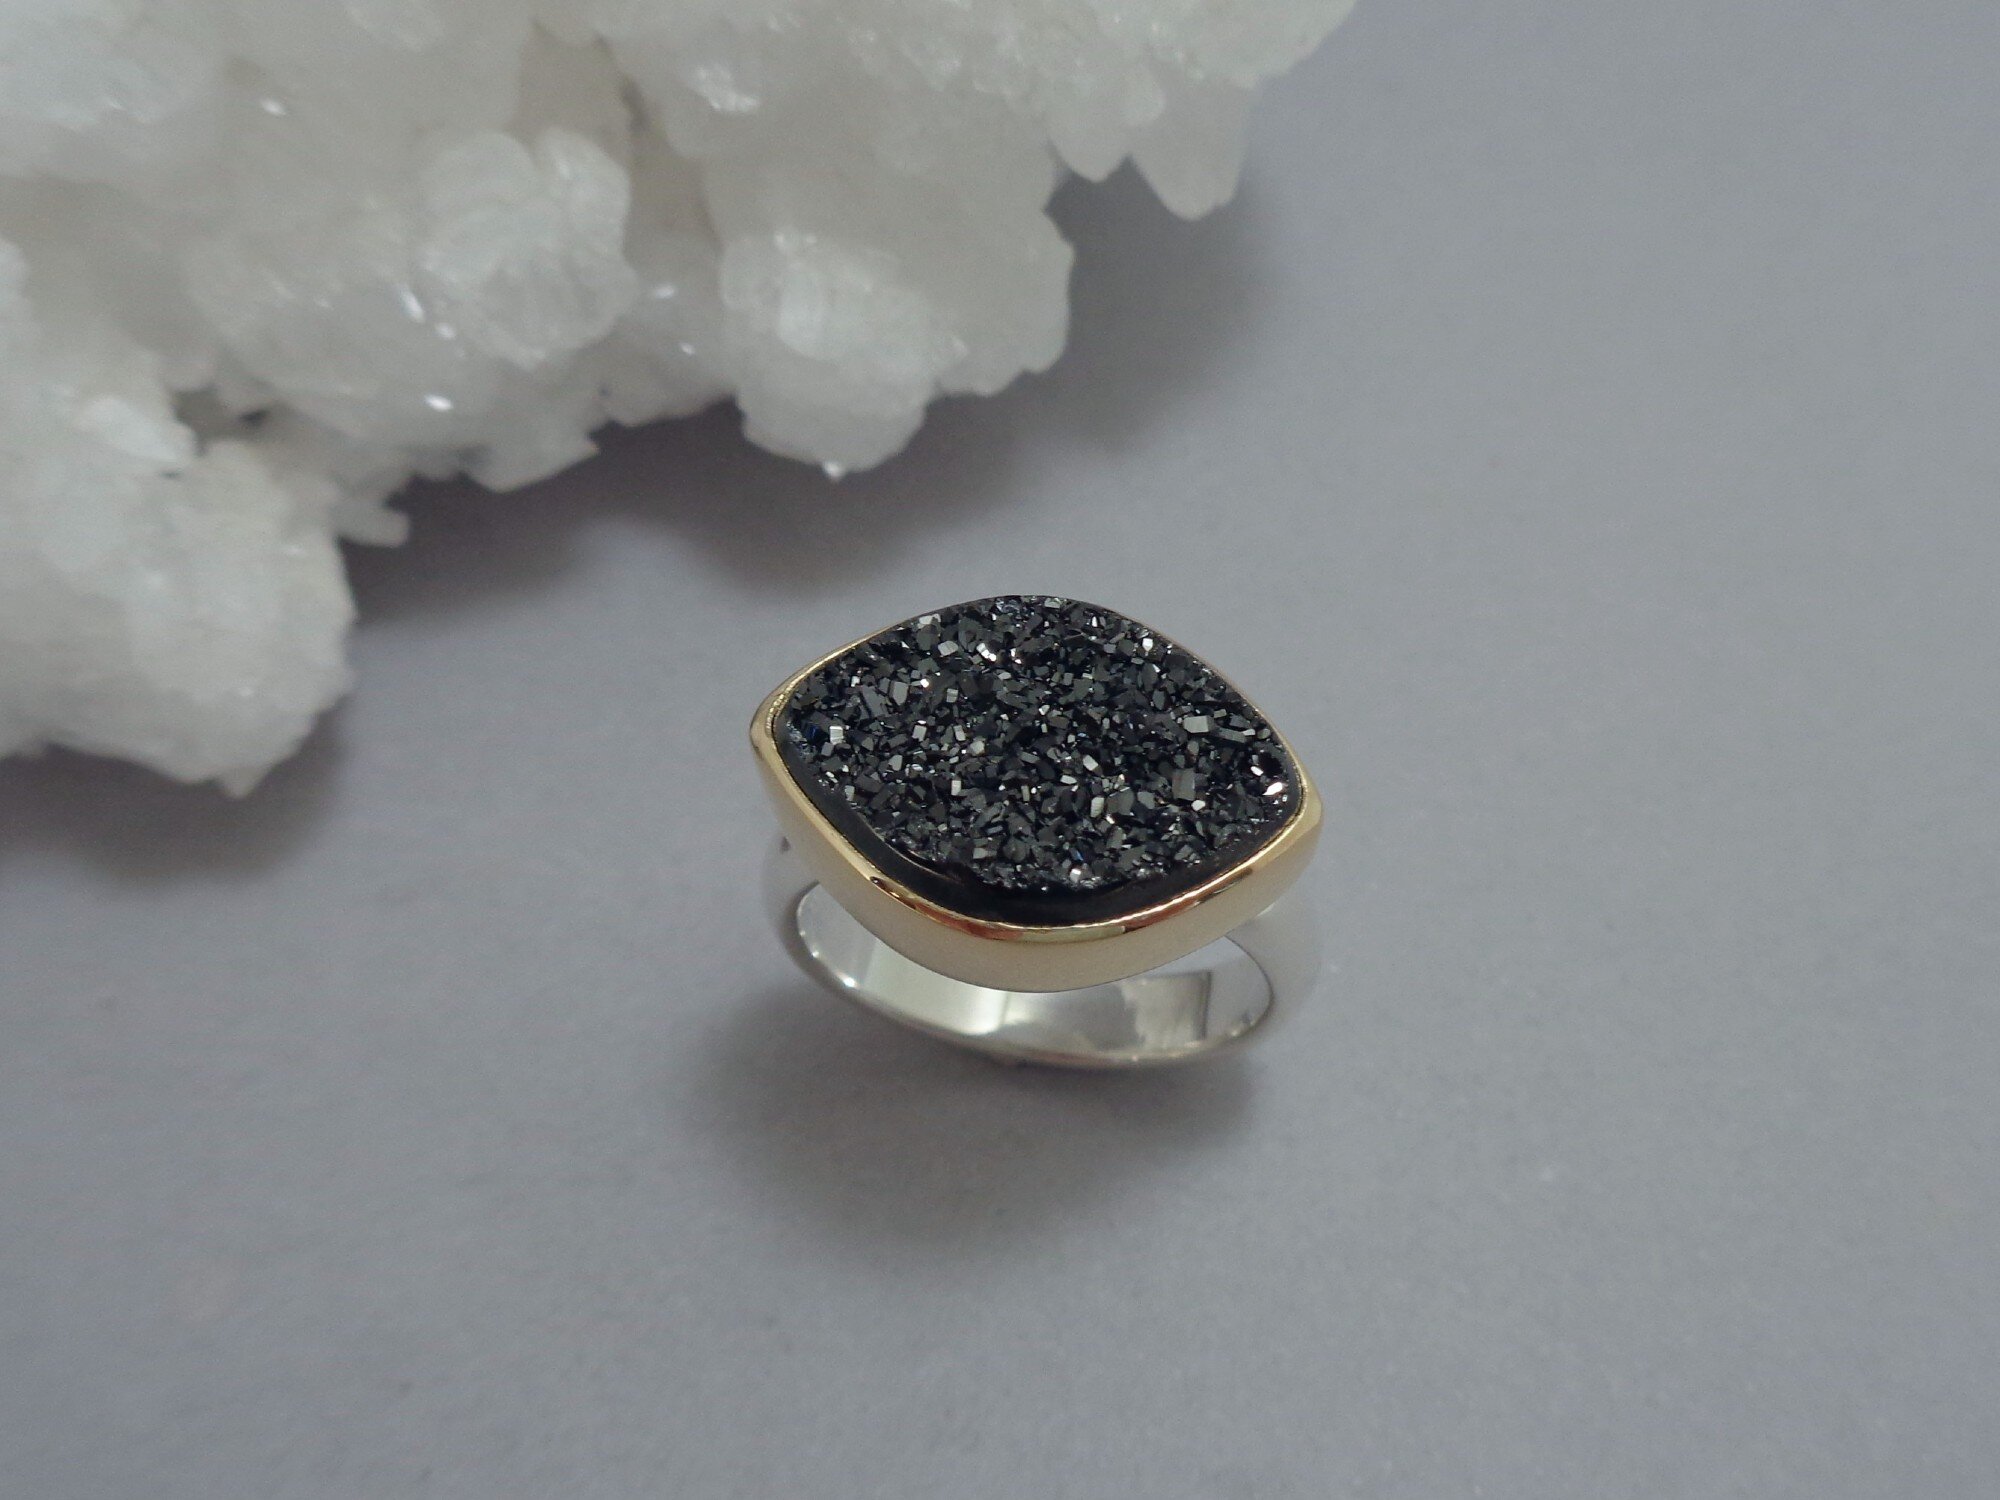 10mm Stone Great Gift for Women Sivalya TWINKLE Black Druzy Ring for Women Size 7 in Solid Sterling Silver 